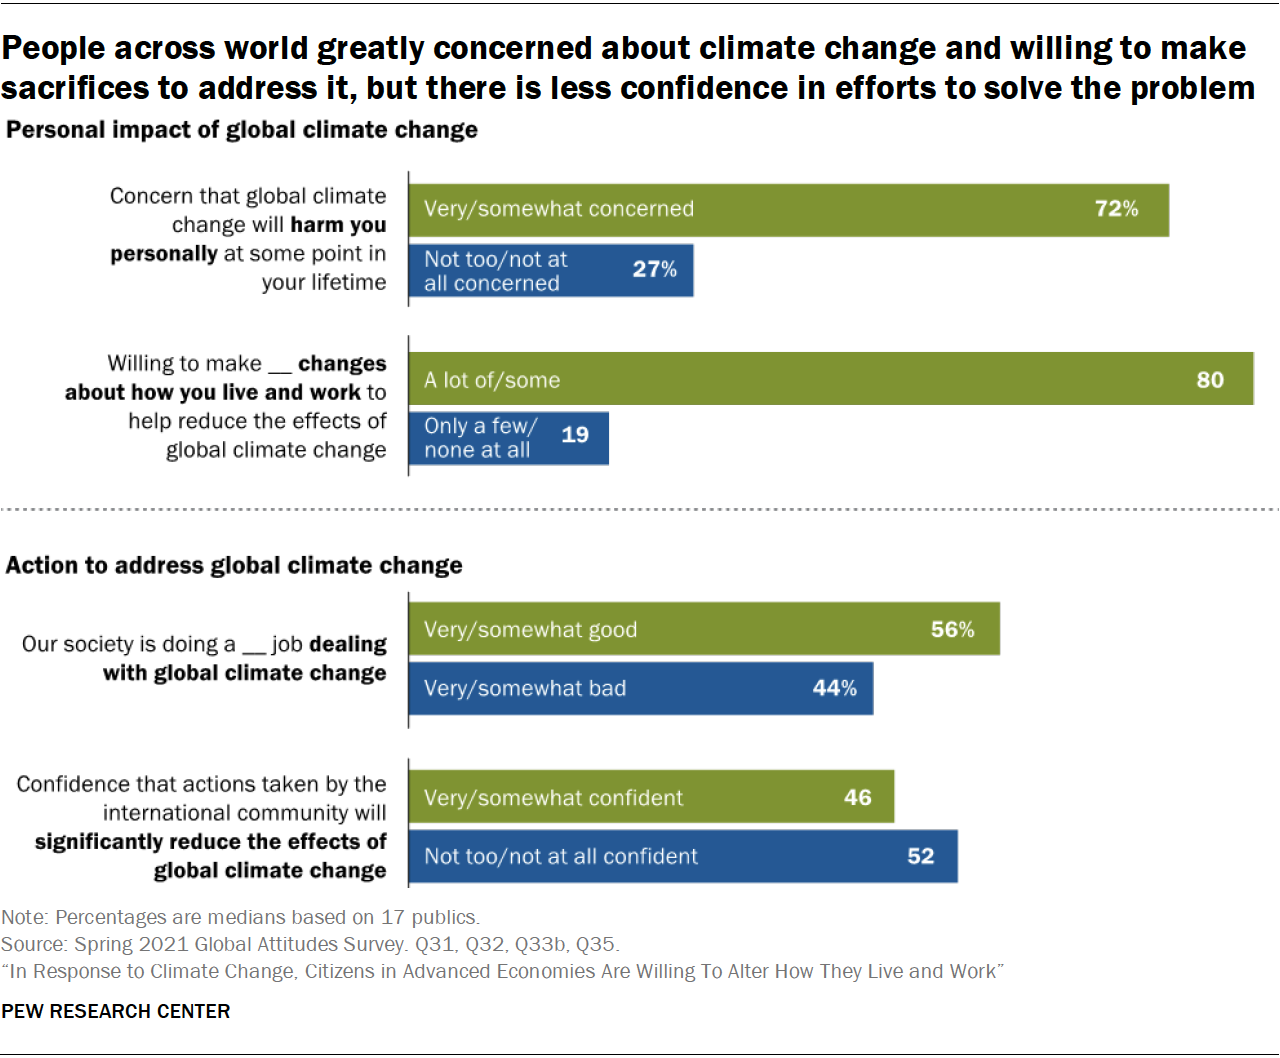 A bar chart showing that people across the world are greatly concerned about climate change and willing to make sacrifices to address it, but there is less confidence in efforts to solve the problem